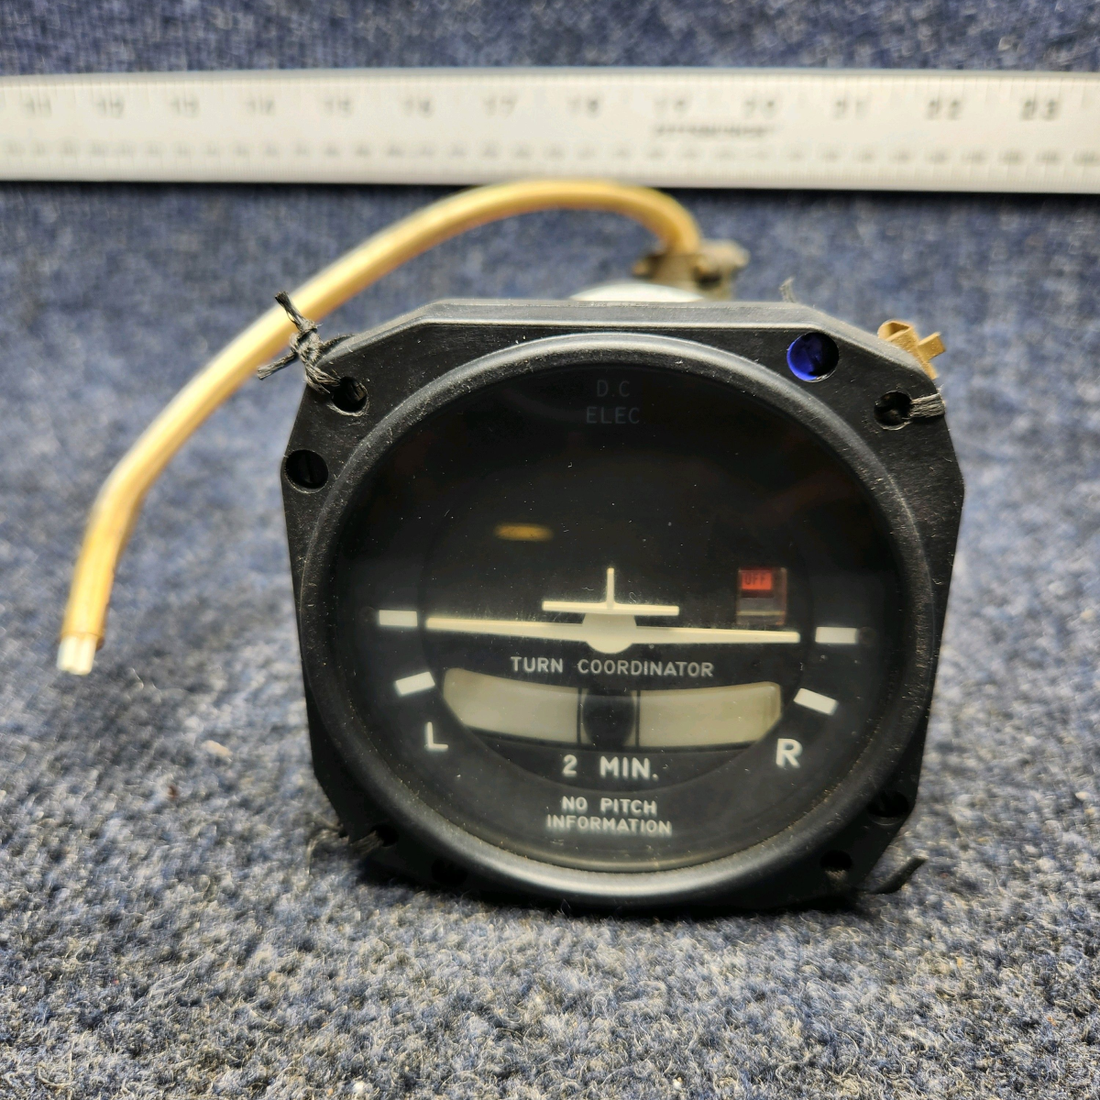 Used aircraft parts for sale, 1394T100-7Z Mid-Continent PIPIR PA32RT-300 MID-CONTINENT INSTRUMENT TURN COORDINATOR INDICATOR (VOLTS: 12-32)